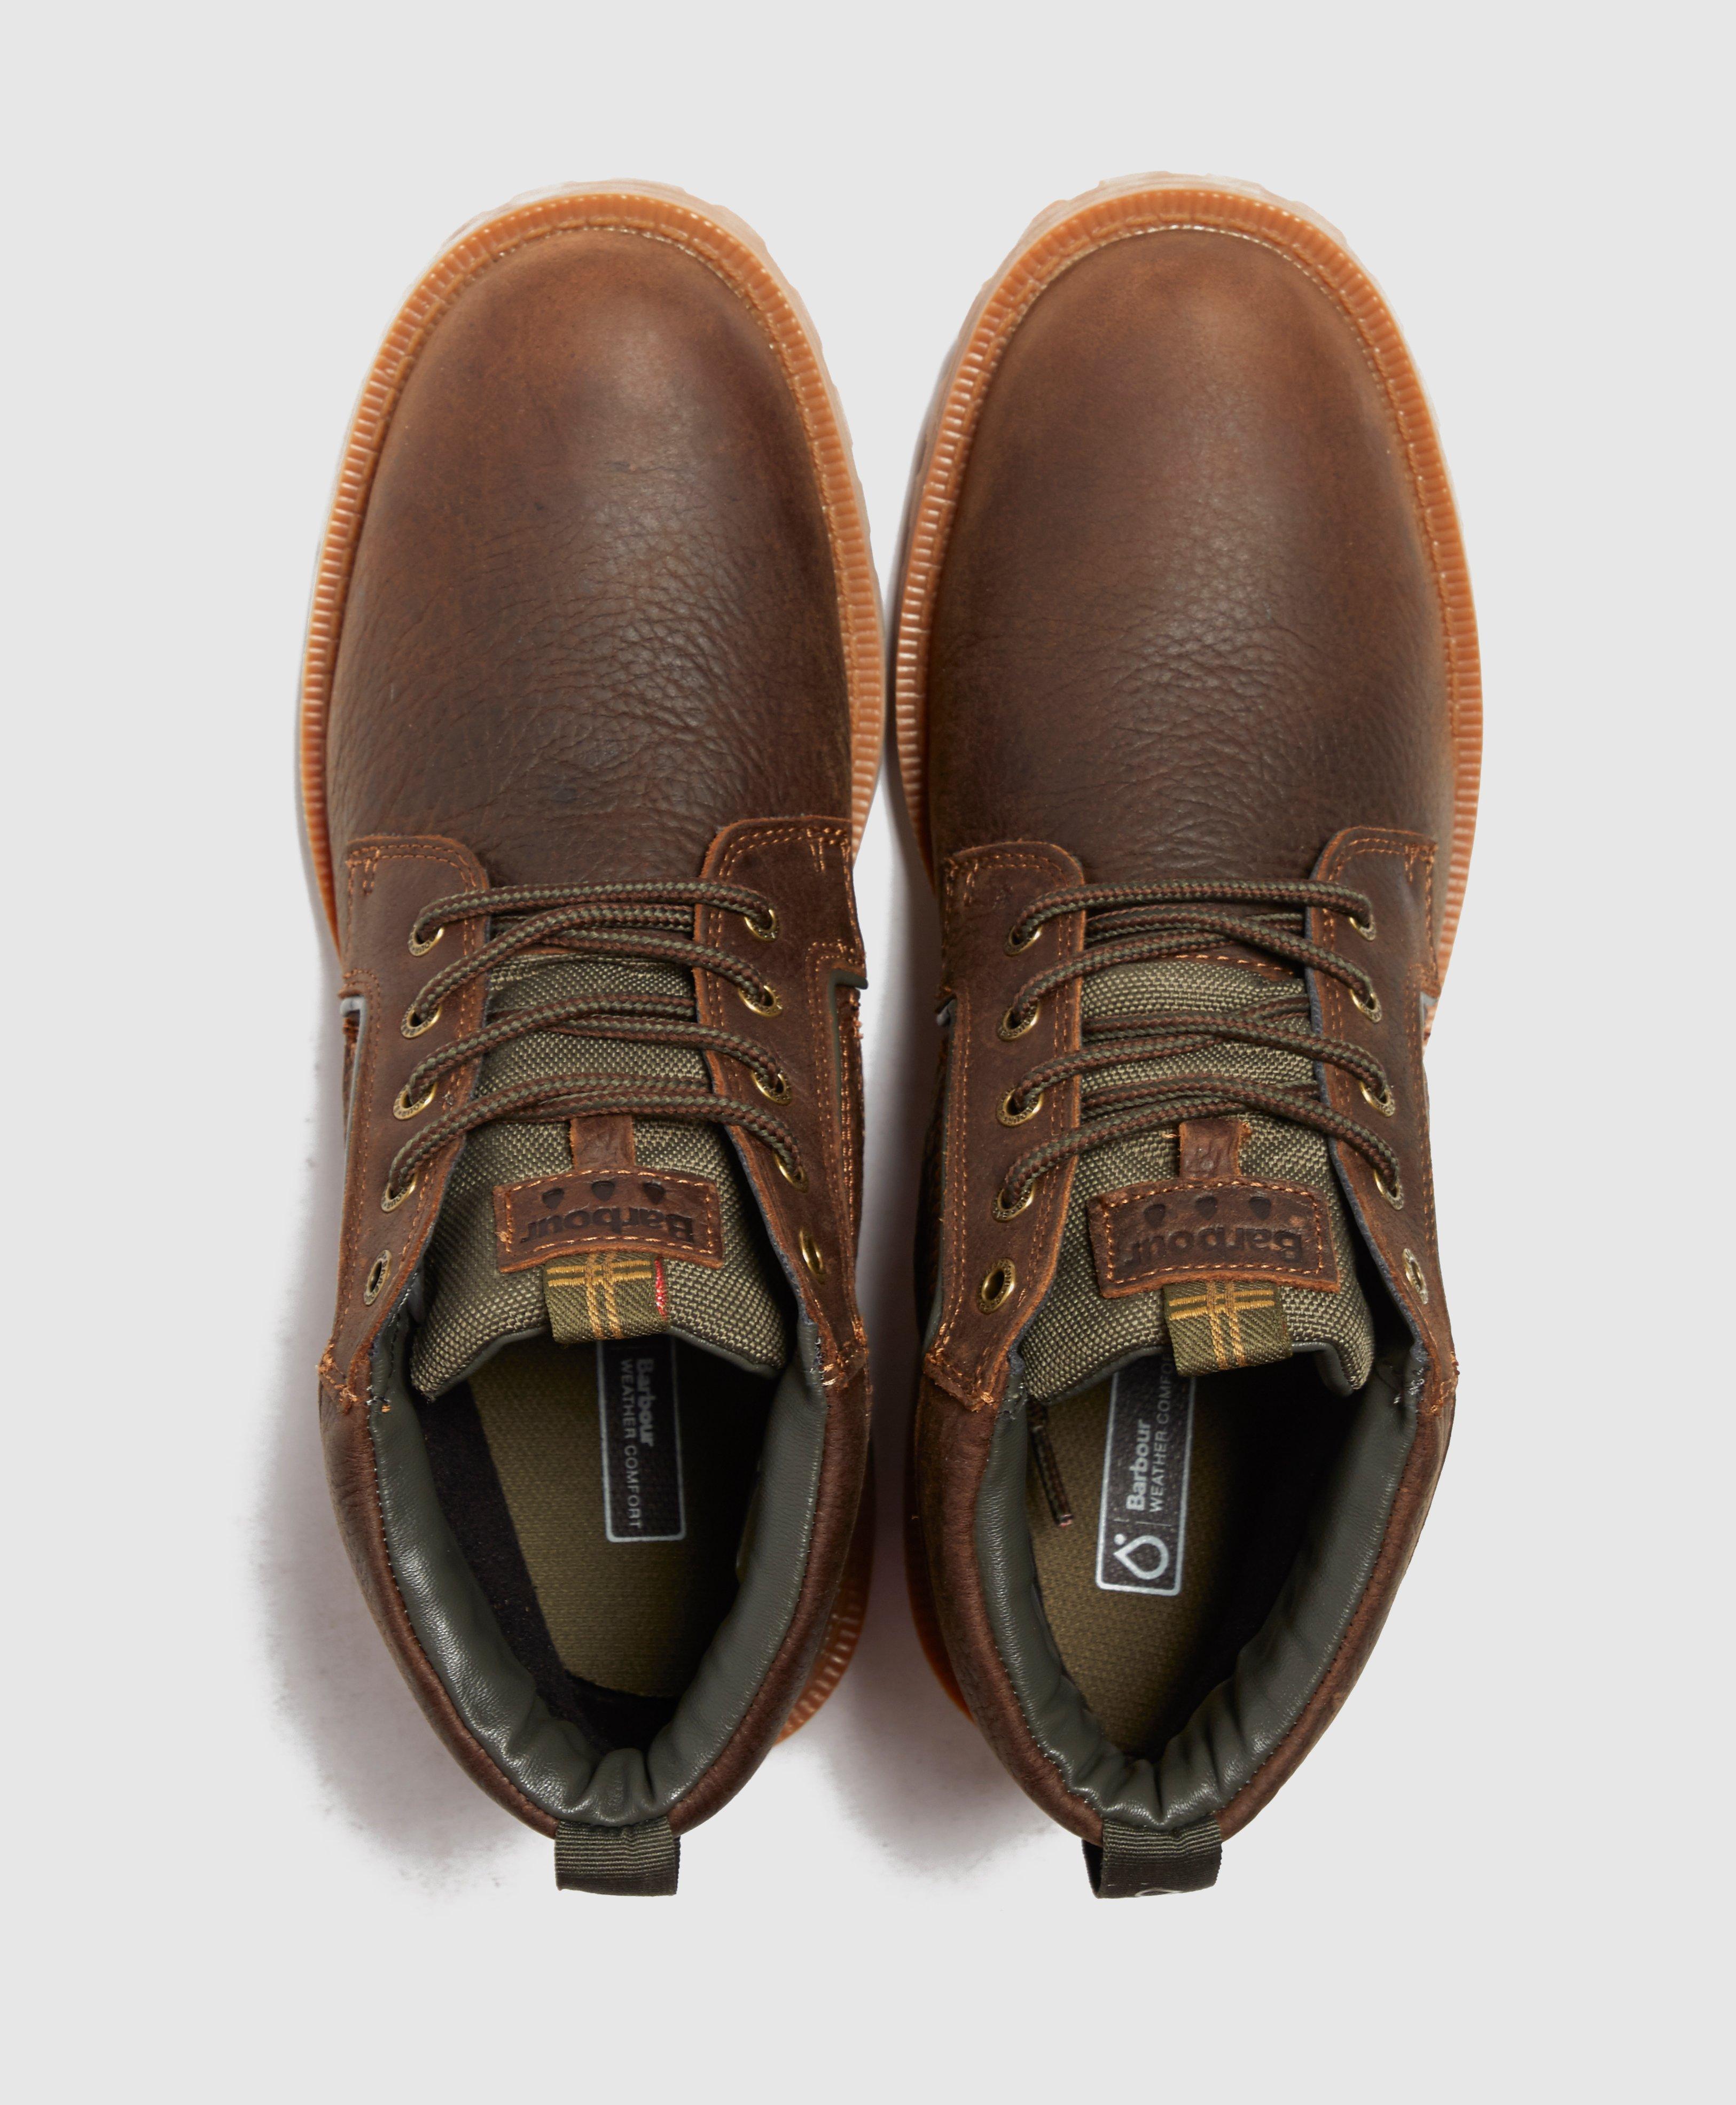 barbour hury derby boot